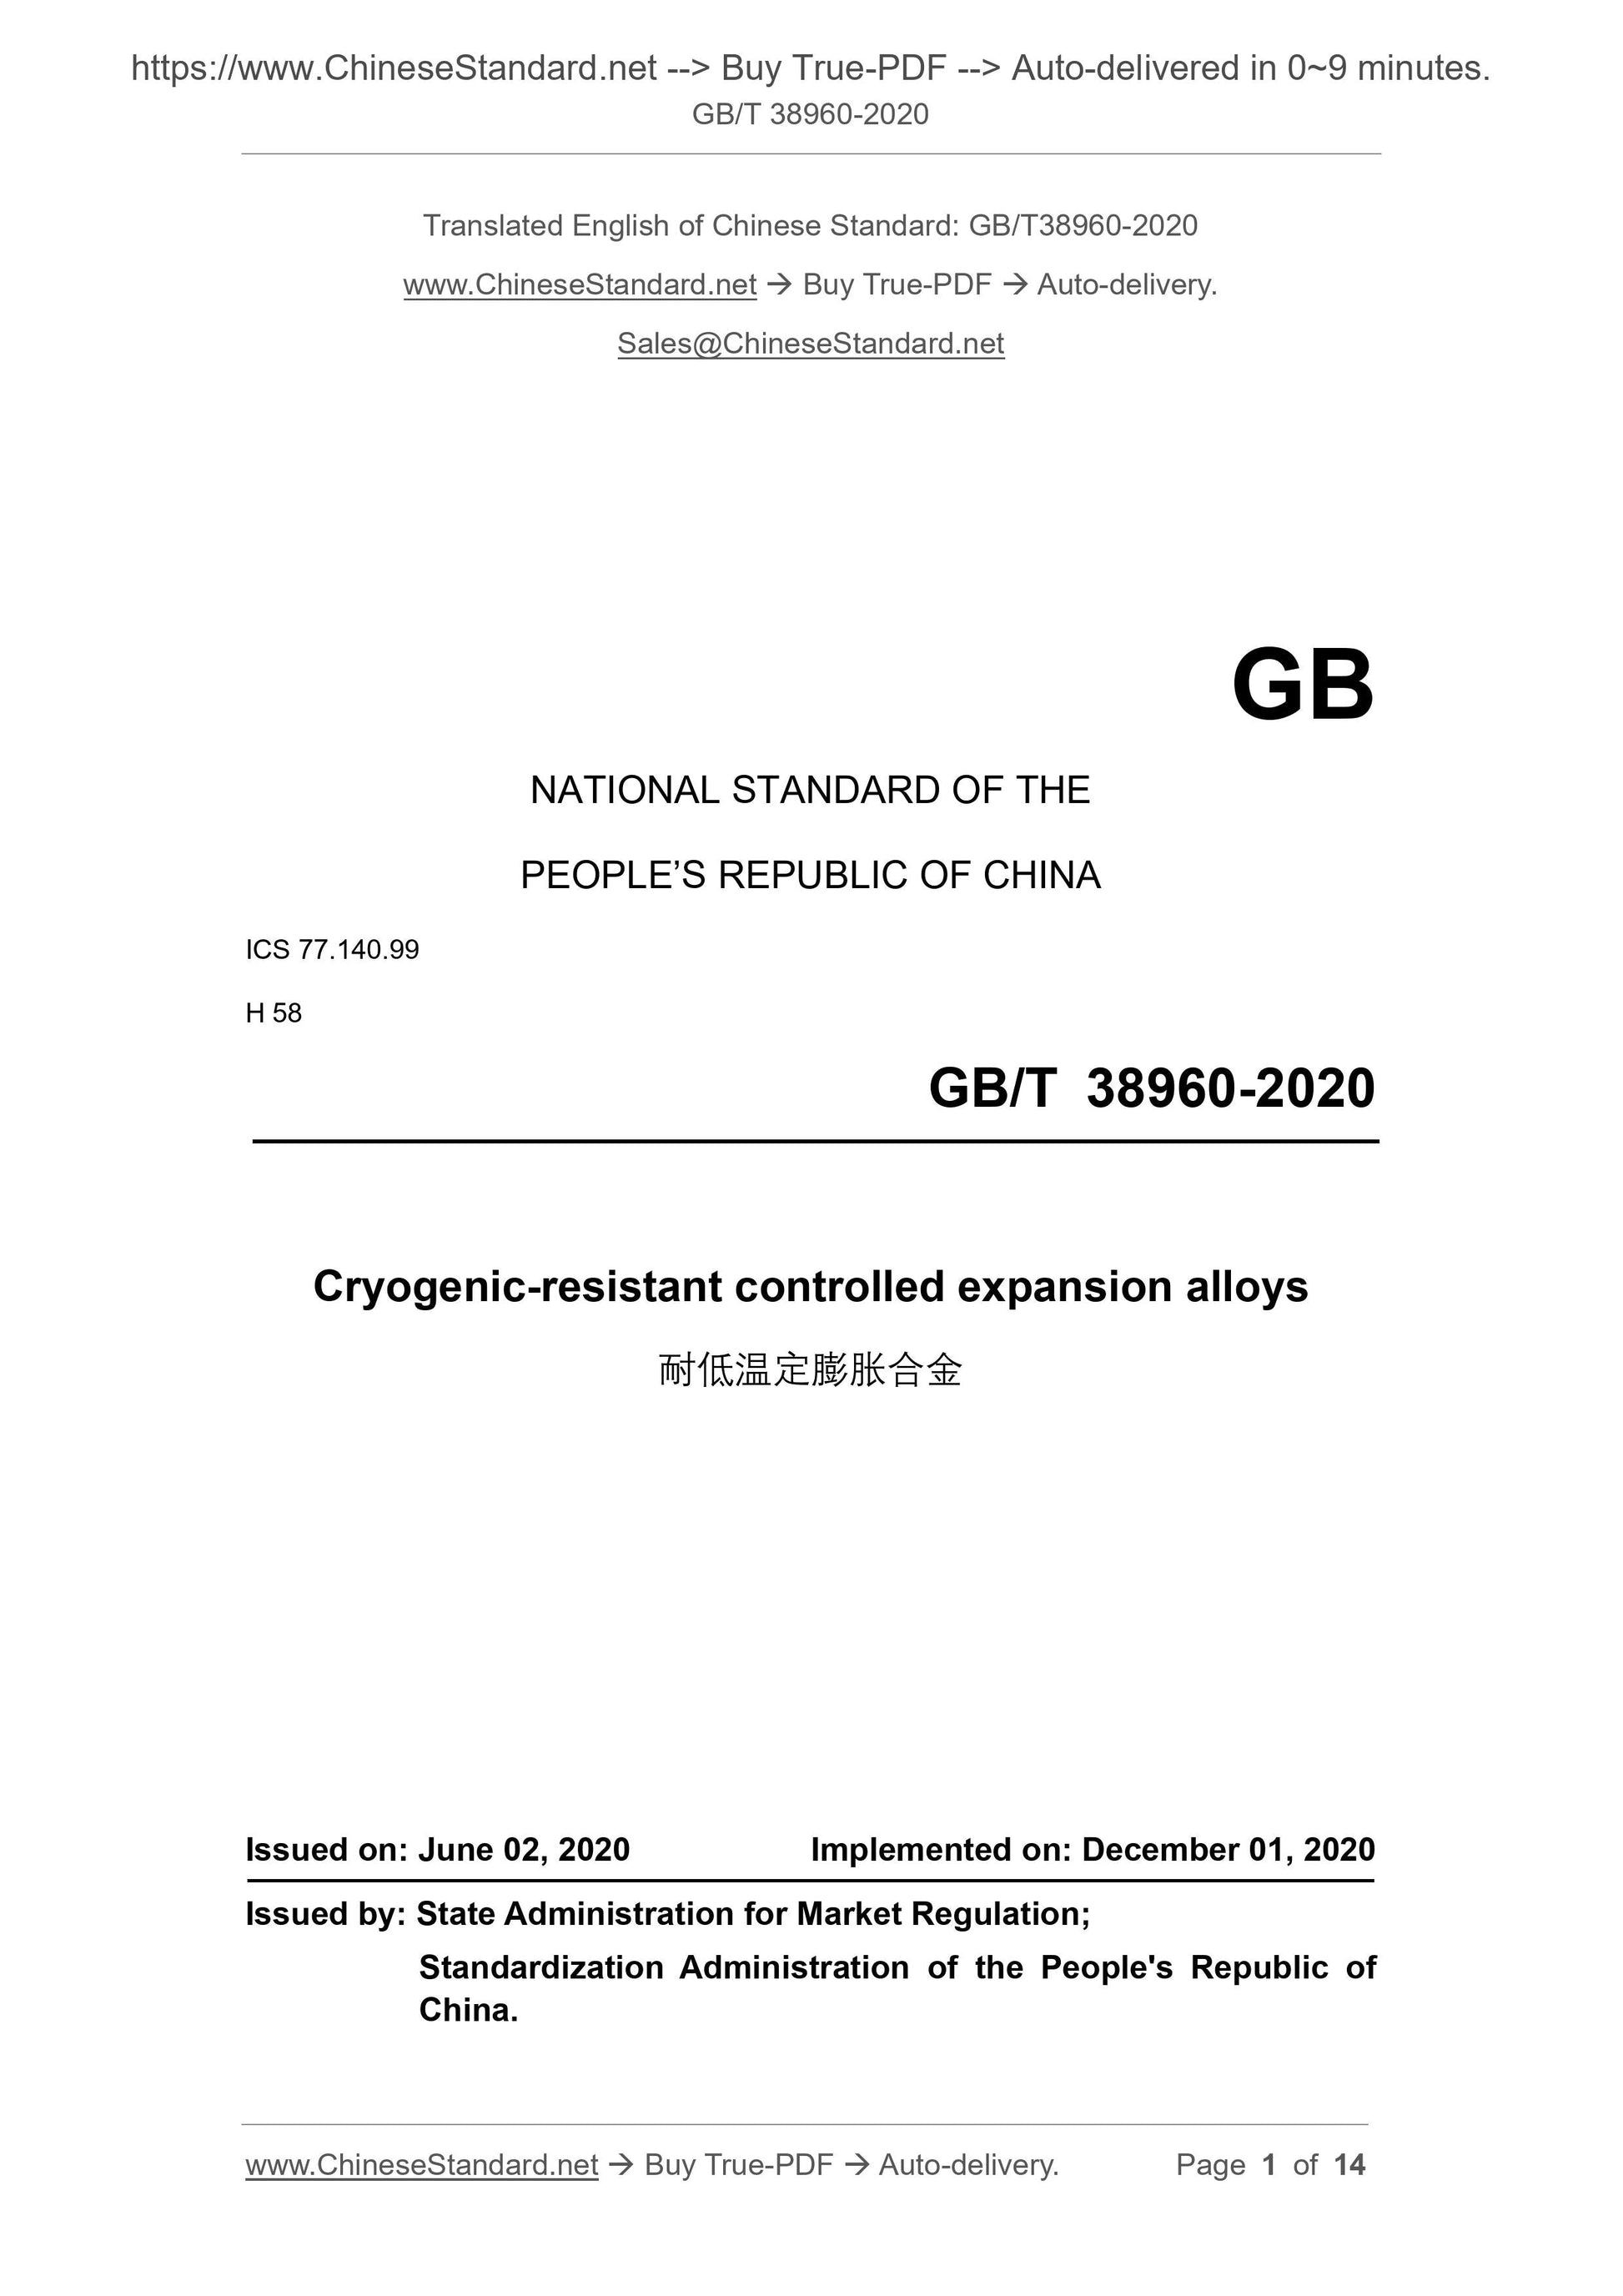 GB/T 38960-2020 Page 1